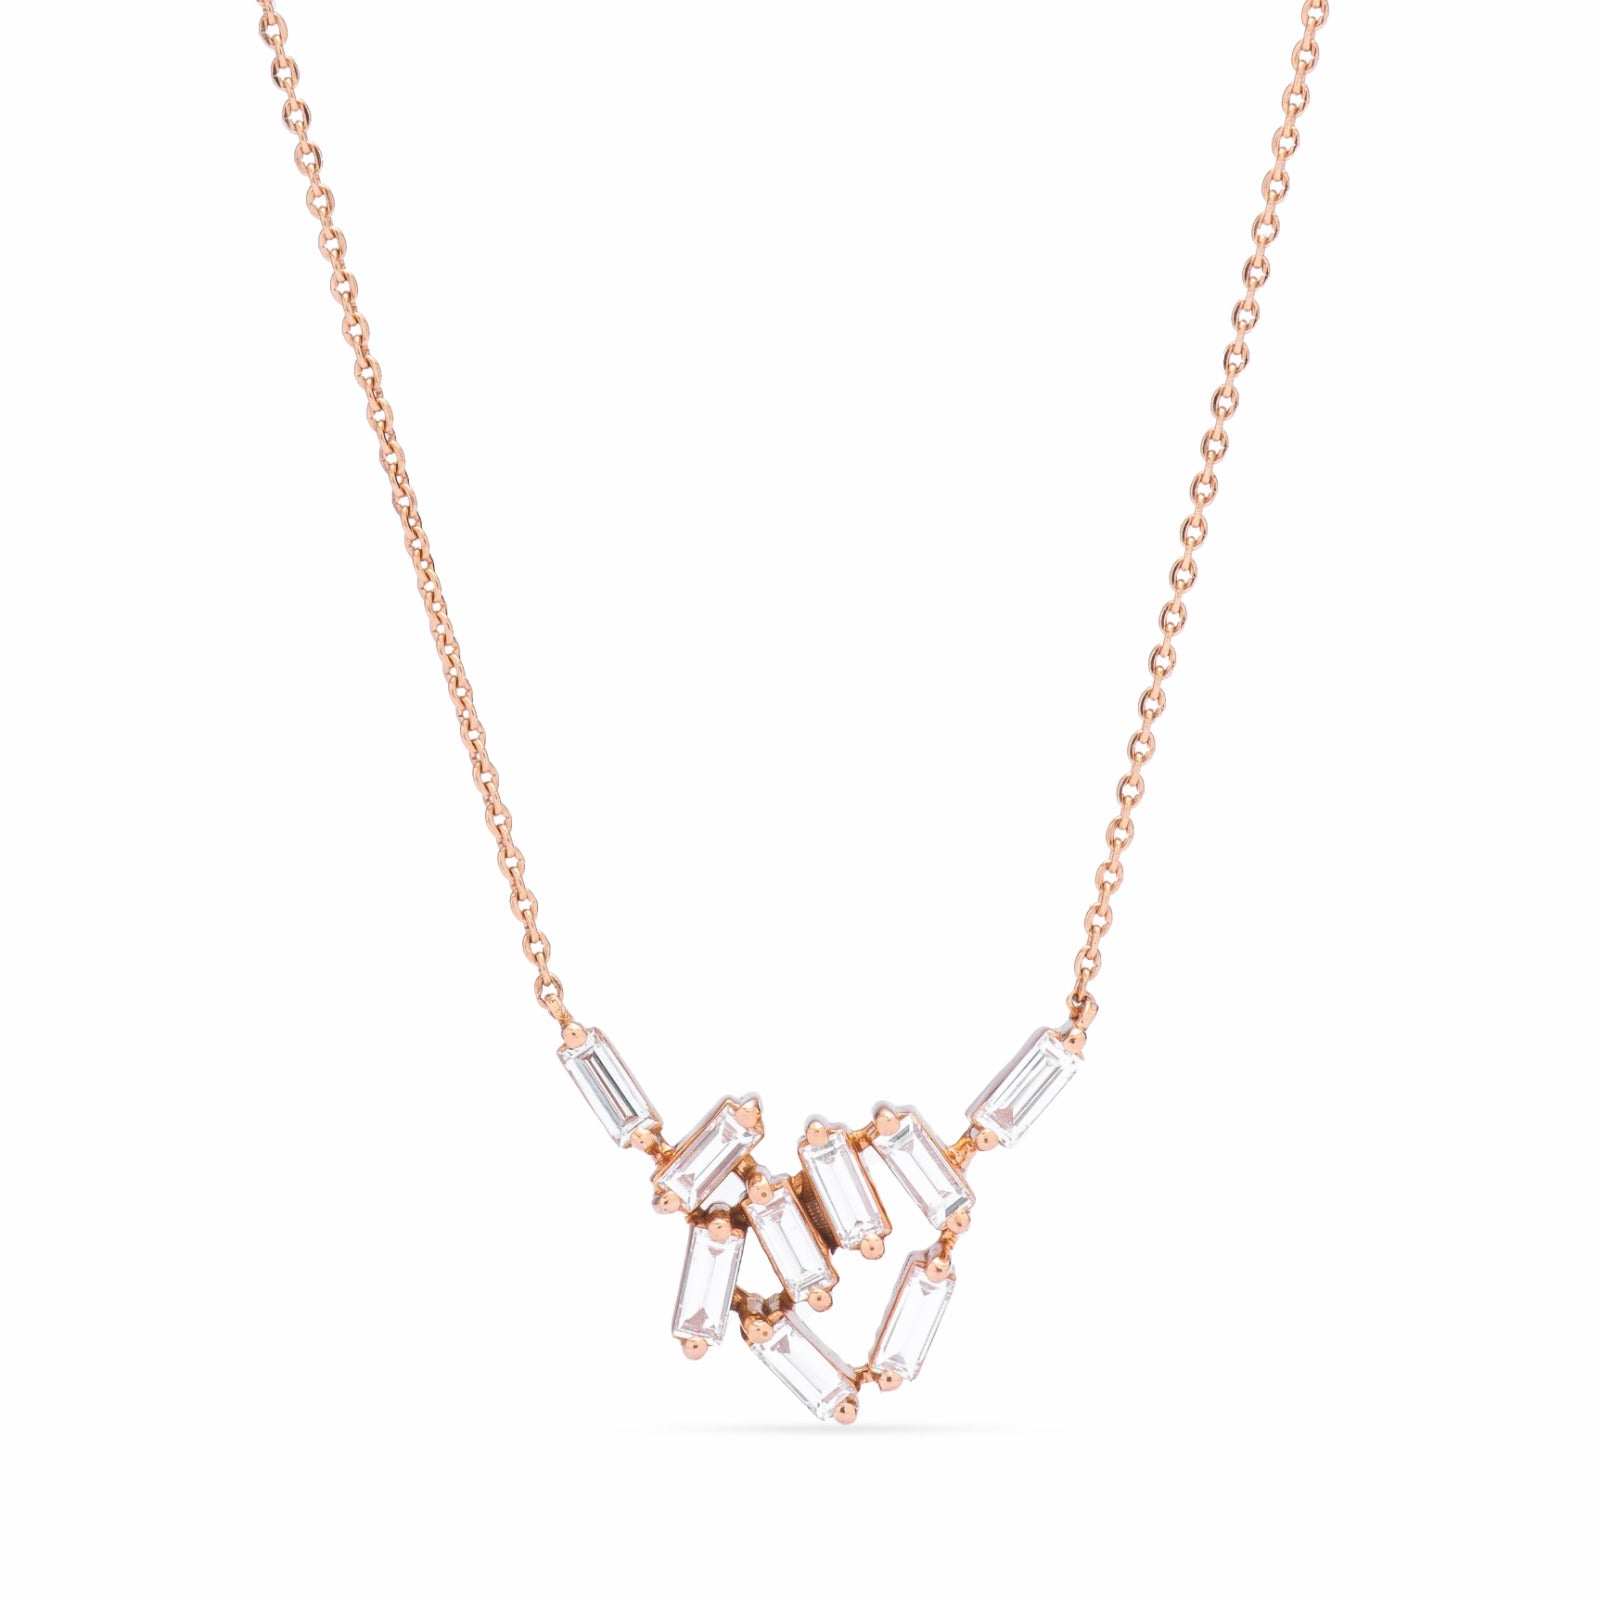 Irregular shaped diamond baguettes necklace in 18k yellow gold - SIR1939